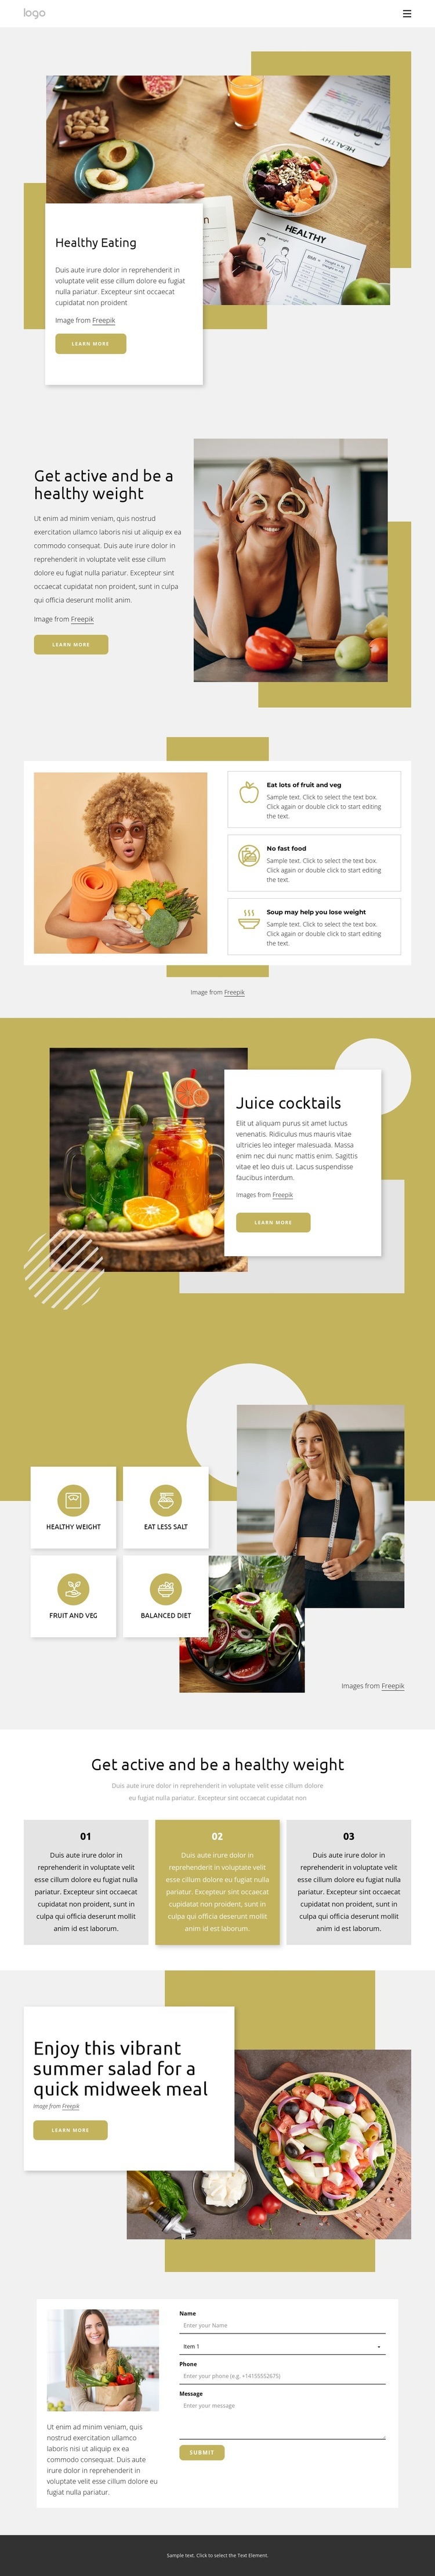 Focus on healthy eating Wix Template Alternative